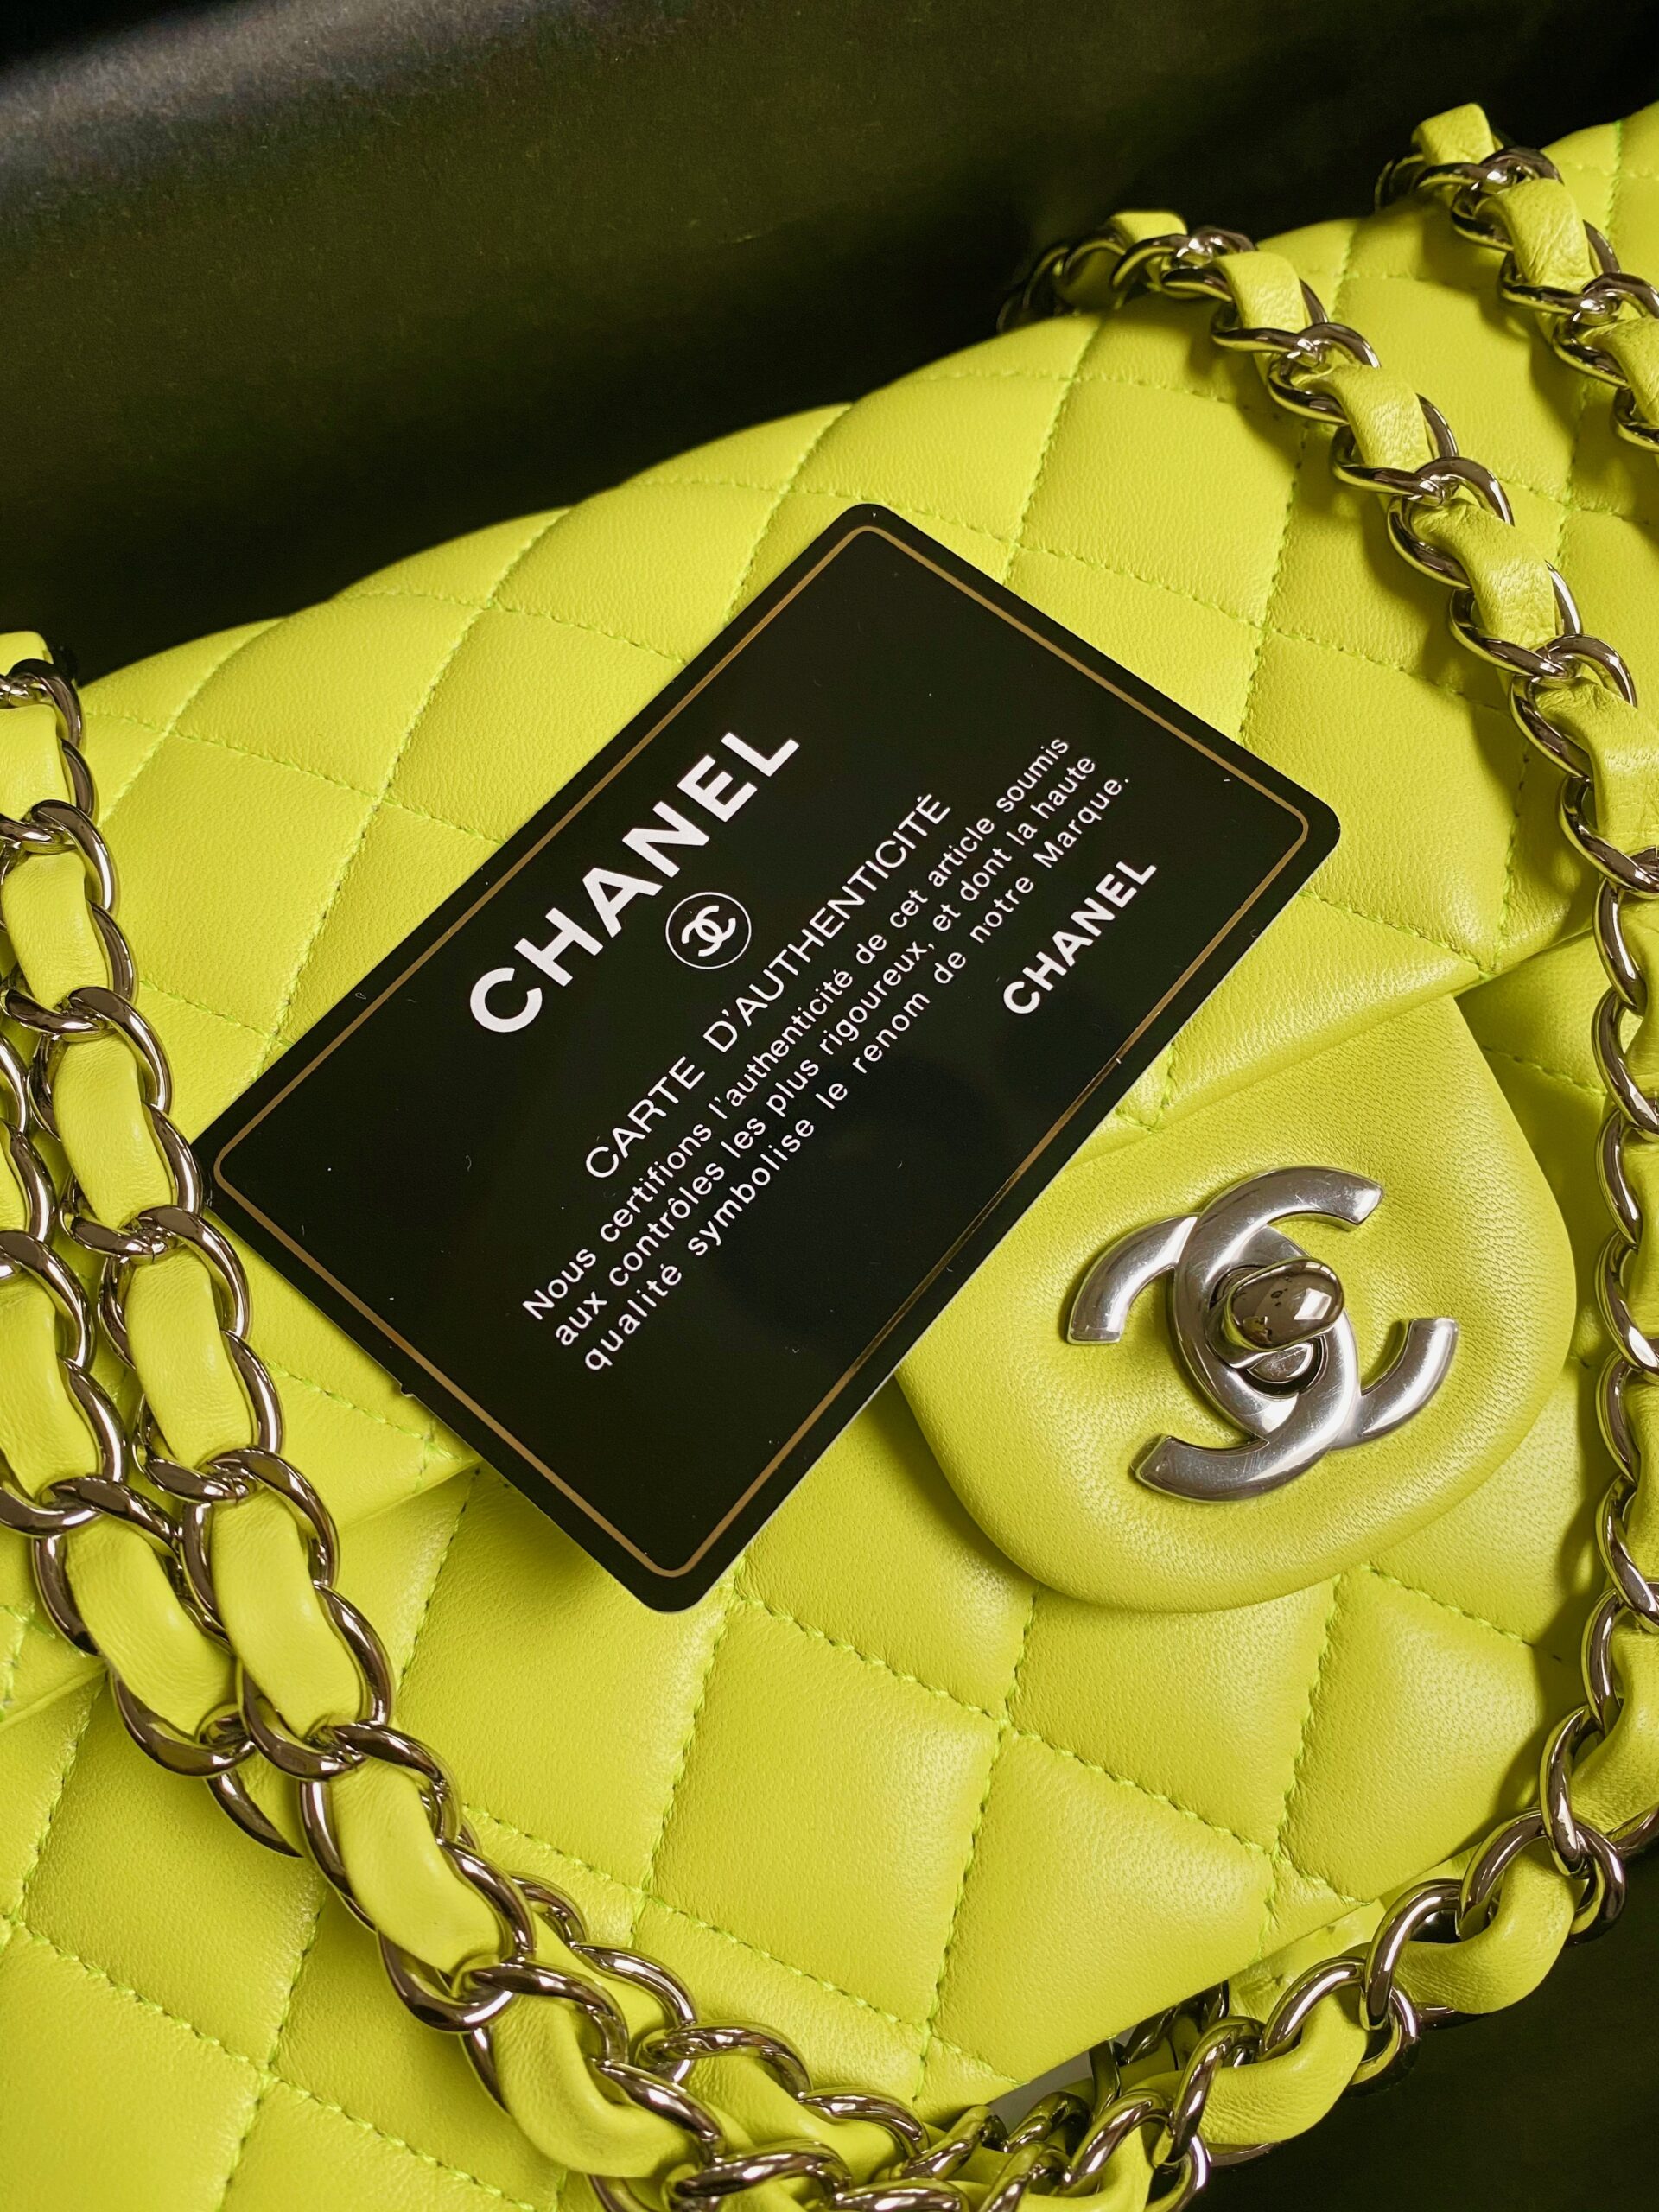 Is Chanel Ditching its Authenticity Cards? - PurseBop